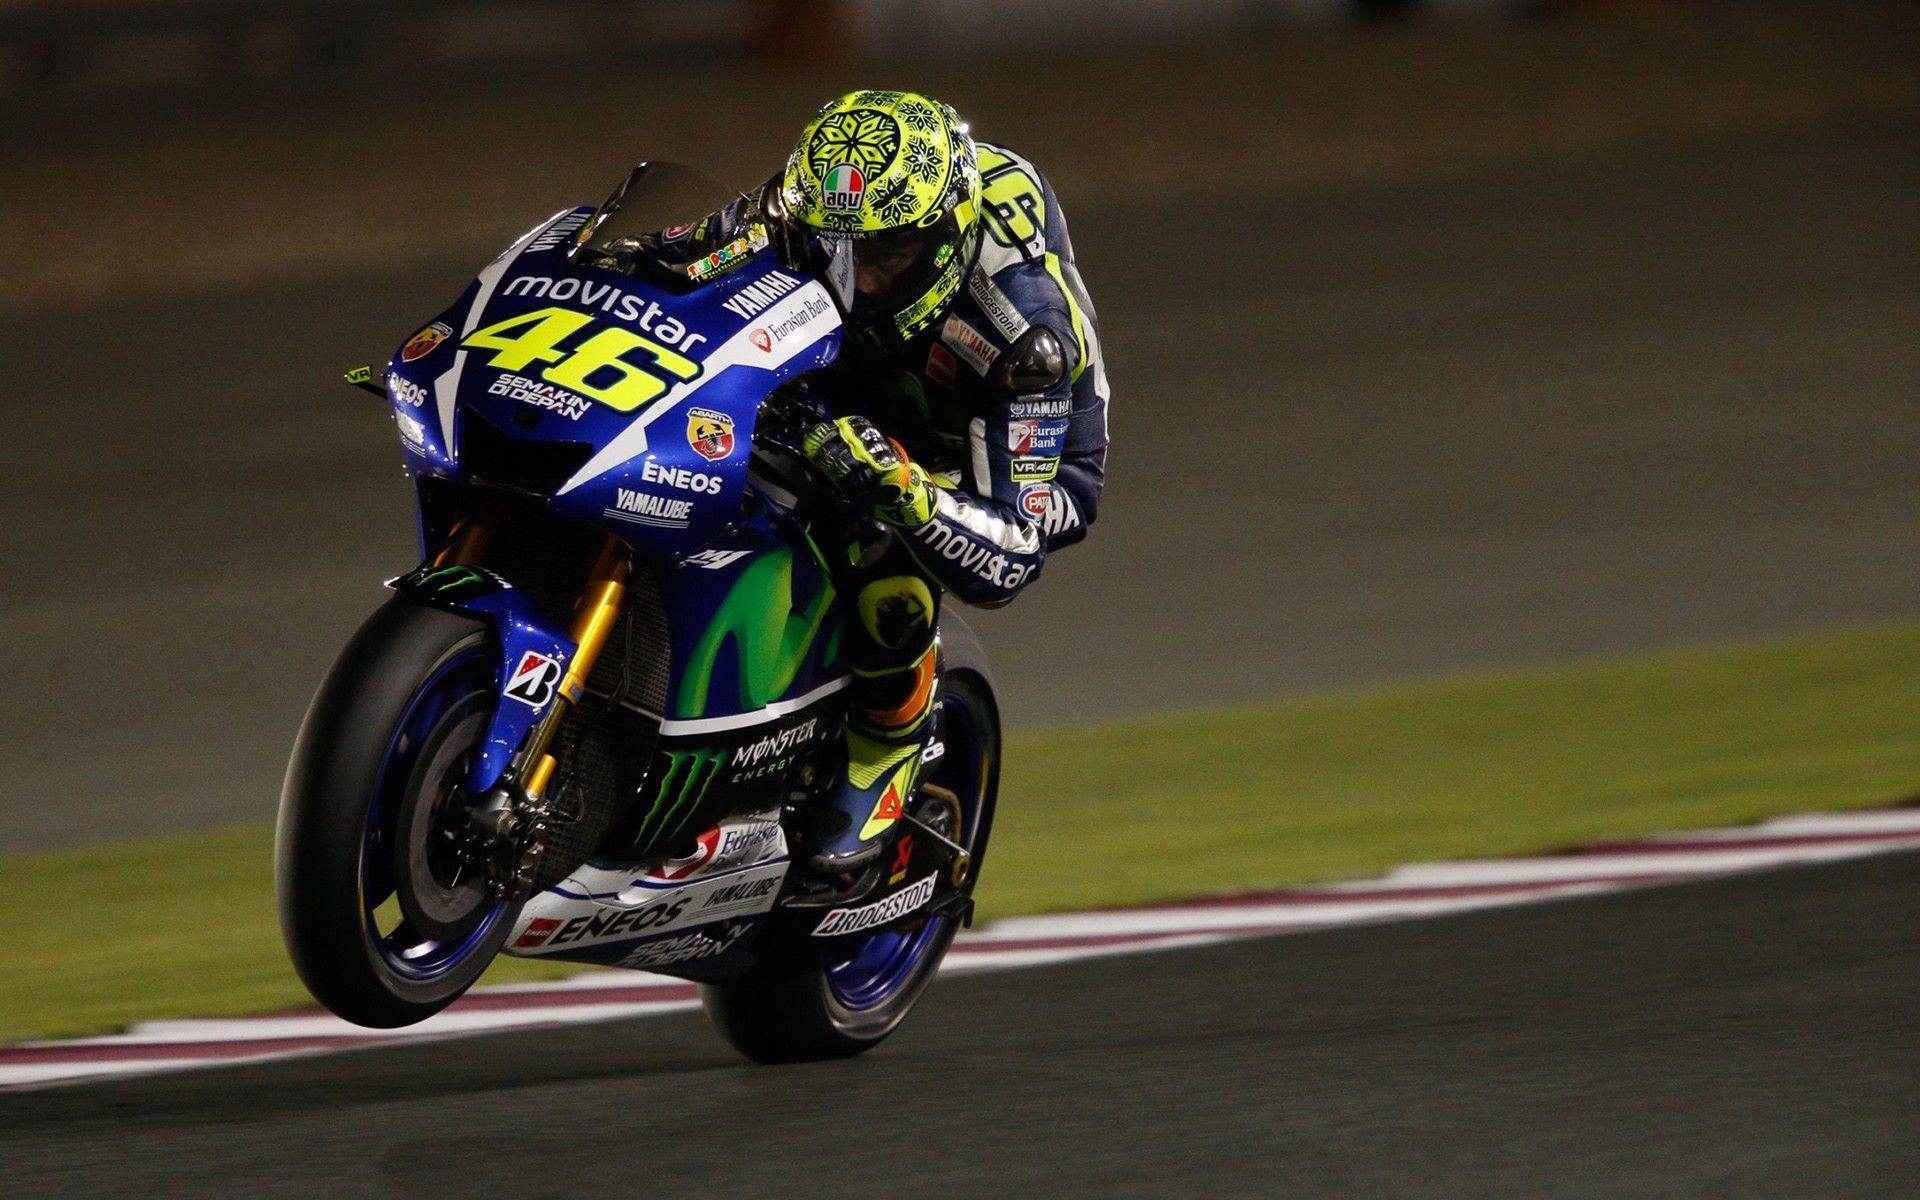 Download VR46 Rossi Wallpapers HD 4K Free for Android - VR46 Rossi  Wallpapers HD 4K APK Download - STEPrimo.com